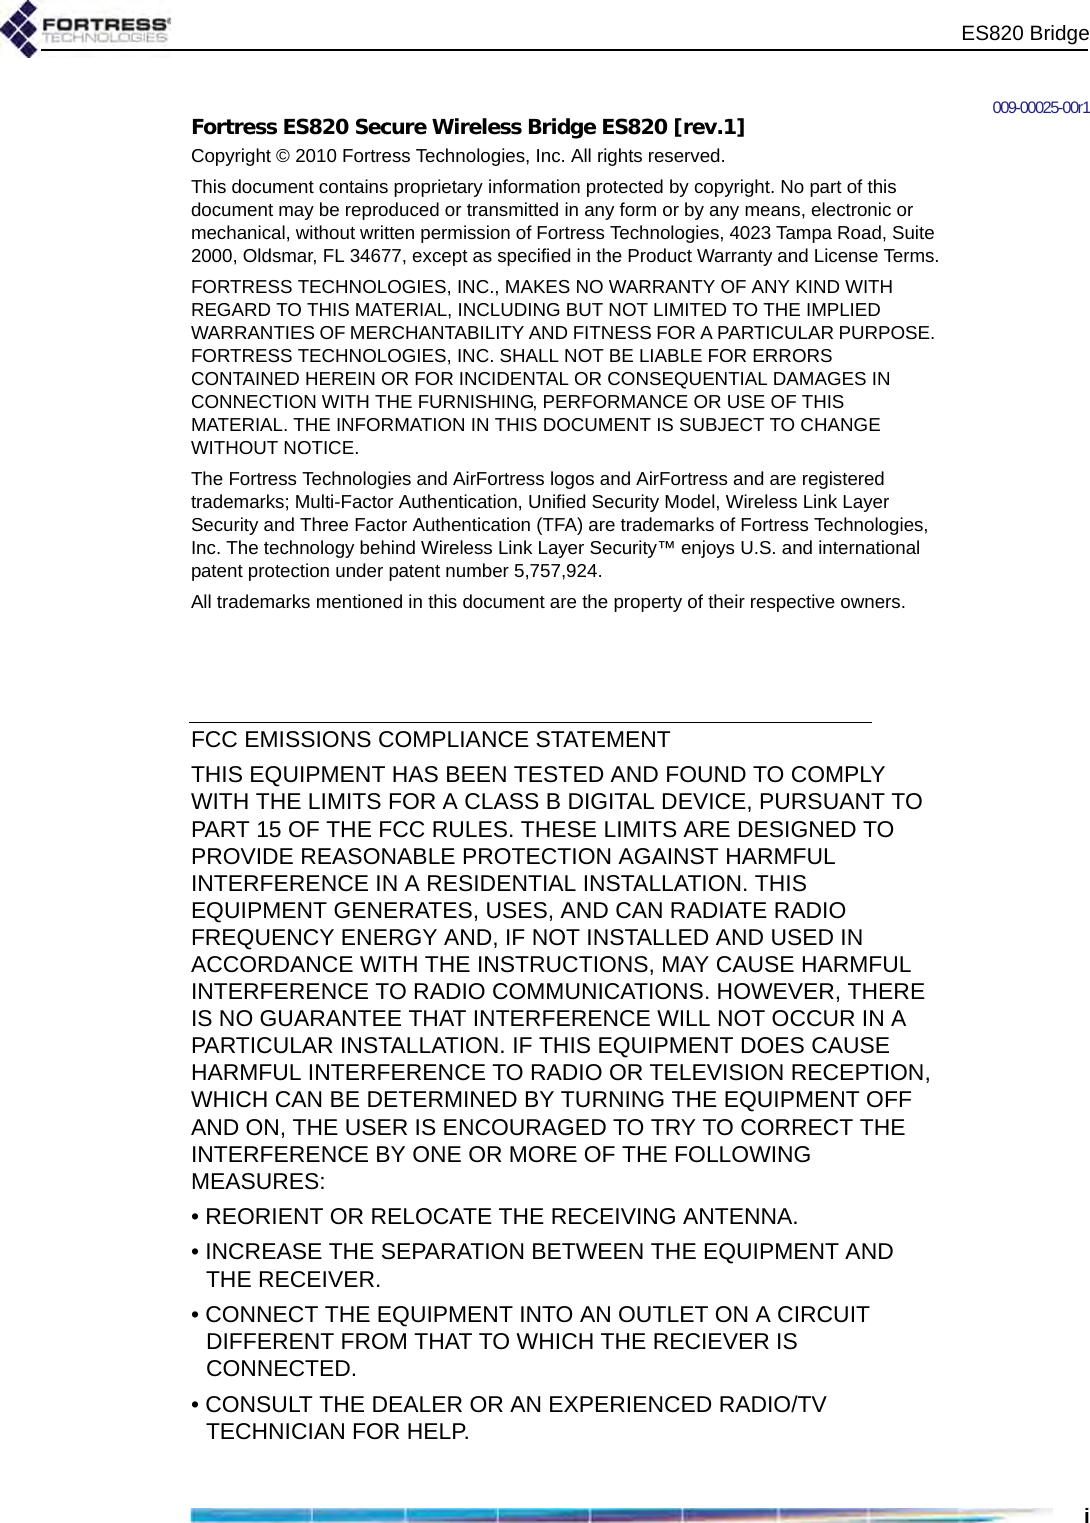 ES820 Bridgei009-00025-00r1Fortress ES820 Secure Wireless Bridge ES820 [rev.1]Copyright © 2010 Fortress Technologies, Inc. All rights reserved.This document contains proprietary information protected by copyright. No part of this document may be reproduced or transmitted in any form or by any means, electronic or mechanical, without written permission of Fortress Technologies, 4023 Tampa Road, Suite 2000, Oldsmar, FL 34677, except as specified in the Product Warranty and License Terms.FORTRESS TECHNOLOGIES, INC., MAKES NO WARRANTY OF ANY KIND WITH REGARD TO THIS MATERIAL, INCLUDING BUT NOT LIMITED TO THE IMPLIED WARRANTIES OF MERCHANTABILITY AND FITNESS FOR A PARTICULAR PURPOSE. FORTRESS TECHNOLOGIES, INC. SHALL NOT BE LIABLE FOR ERRORS CONTAINED HEREIN OR FOR INCIDENTAL OR CONSEQUENTIAL DAMAGES IN CONNECTION WITH THE FURNISHING, PERFORMANCE OR USE OF THIS MATERIAL. THE INFORMATION IN THIS DOCUMENT IS SUBJECT TO CHANGE WITHOUT NOTICE.The Fortress Technologies and AirFortress logos and AirFortress and are registered trademarks; Multi-Factor Authentication, Unified Security Model, Wireless Link Layer Security and Three Factor Authentication (TFA) are trademarks of Fortress Technologies, Inc. The technology behind Wireless Link Layer Security™ enjoys U.S. and international patent protection under patent number 5,757,924.All trademarks mentioned in this document are the property of their respective owners.FCC EMISSIONS COMPLIANCE STATEMENT   THIS EQUIPMENT HAS BEEN TESTED AND FOUND TO COMPLY WITH THE LIMITS FOR A CLASS B DIGITAL DEVICE, PURSUANT TO PART 15 OF THE FCC RULES. THESE LIMITS ARE DESIGNED TO PROVIDE REASONABLE PROTECTION AGAINST HARMFUL INTERFERENCE IN A RESIDENTIAL INSTALLATION. THIS EQUIPMENT GENERATES, USES, AND CAN RADIATE RADIO FREQUENCY ENERGY AND, IF NOT INSTALLED AND USED IN ACCORDANCE WITH THE INSTRUCTIONS, MAY CAUSE HARMFUL INTERFERENCE TO RADIO COMMUNICATIONS. HOWEVER, THERE IS NO GUARANTEE THAT INTERFERENCE WILL NOT OCCUR IN A PARTICULAR INSTALLATION. IF THIS EQUIPMENT DOES CAUSE HARMFUL INTERFERENCE TO RADIO OR TELEVISION RECEPTION, WHICH CAN BE DETERMINED BY TURNING THE EQUIPMENT OFF AND ON, THE USER IS ENCOURAGED TO TRY TO CORRECT THE INTERFERENCE BY ONE OR MORE OF THE FOLLOWING MEASURES:• REORIENT OR RELOCATE THE RECEIVING ANTENNA.• INCREASE THE SEPARATION BETWEEN THE EQUIPMENT AND THE RECEIVER.• CONNECT THE EQUIPMENT INTO AN OUTLET ON A CIRCUIT DIFFERENT FROM THAT TO WHICH THE RECIEVER IS CONNECTED.• CONSULT THE DEALER OR AN EXPERIENCED RADIO/TV TECHNICIAN FOR HELP.